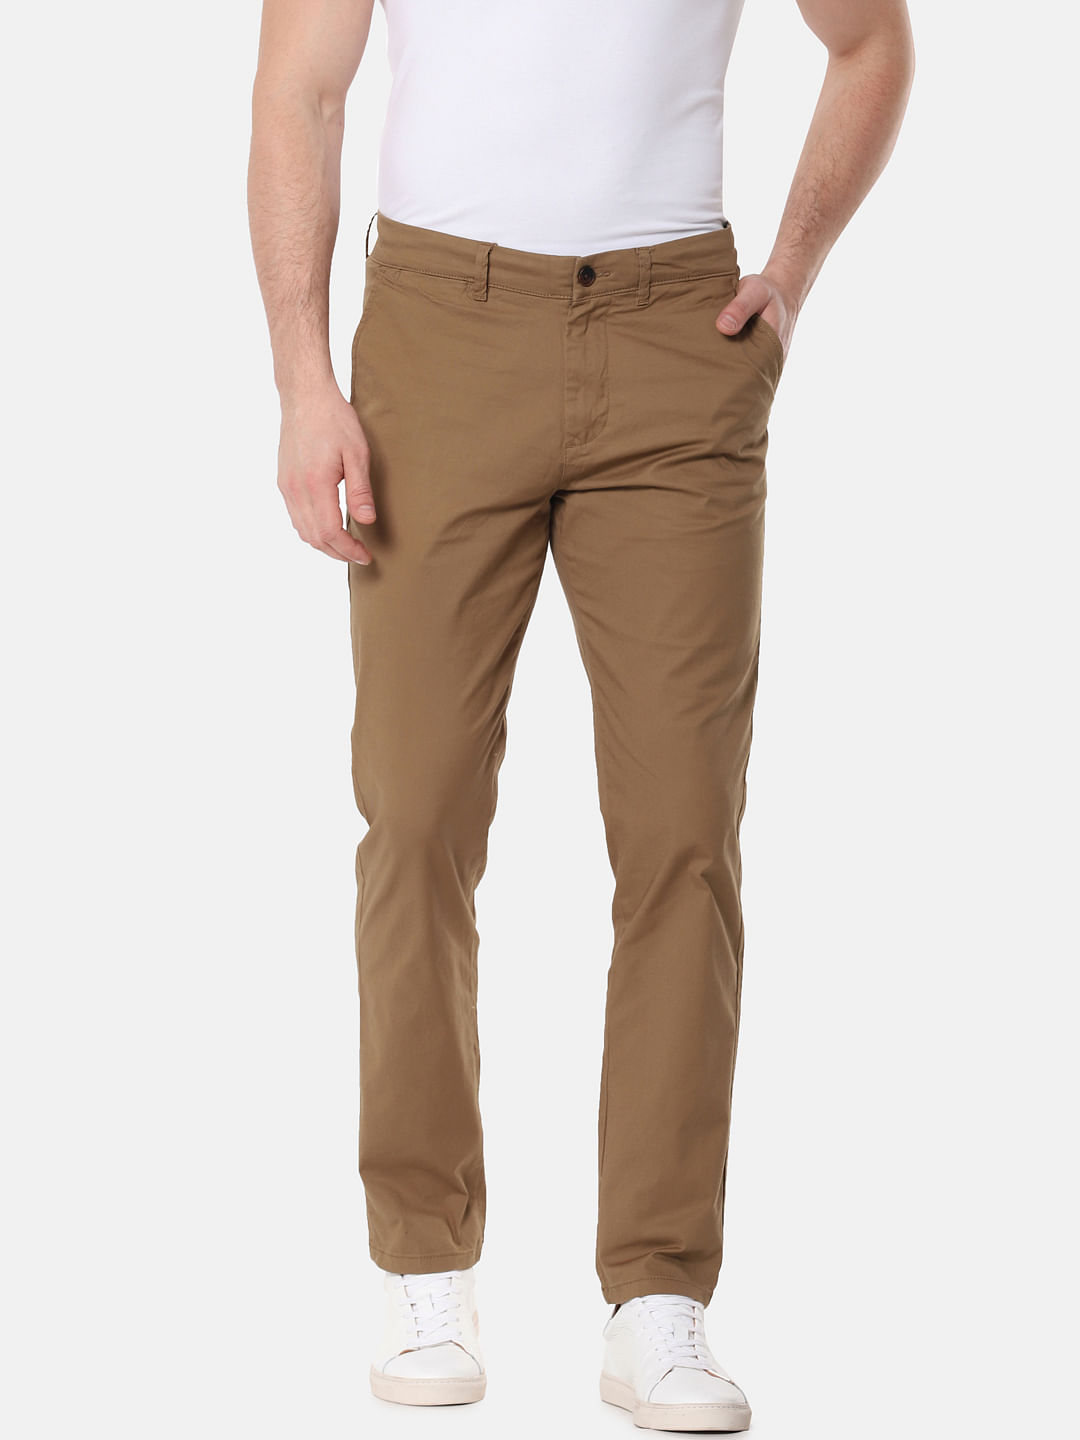 multi Multicolor Mens Boys Chino Branded Designer Cotton Trouser Pant,  Size: 28 To .34 at Rs 325/piece in New Delhi